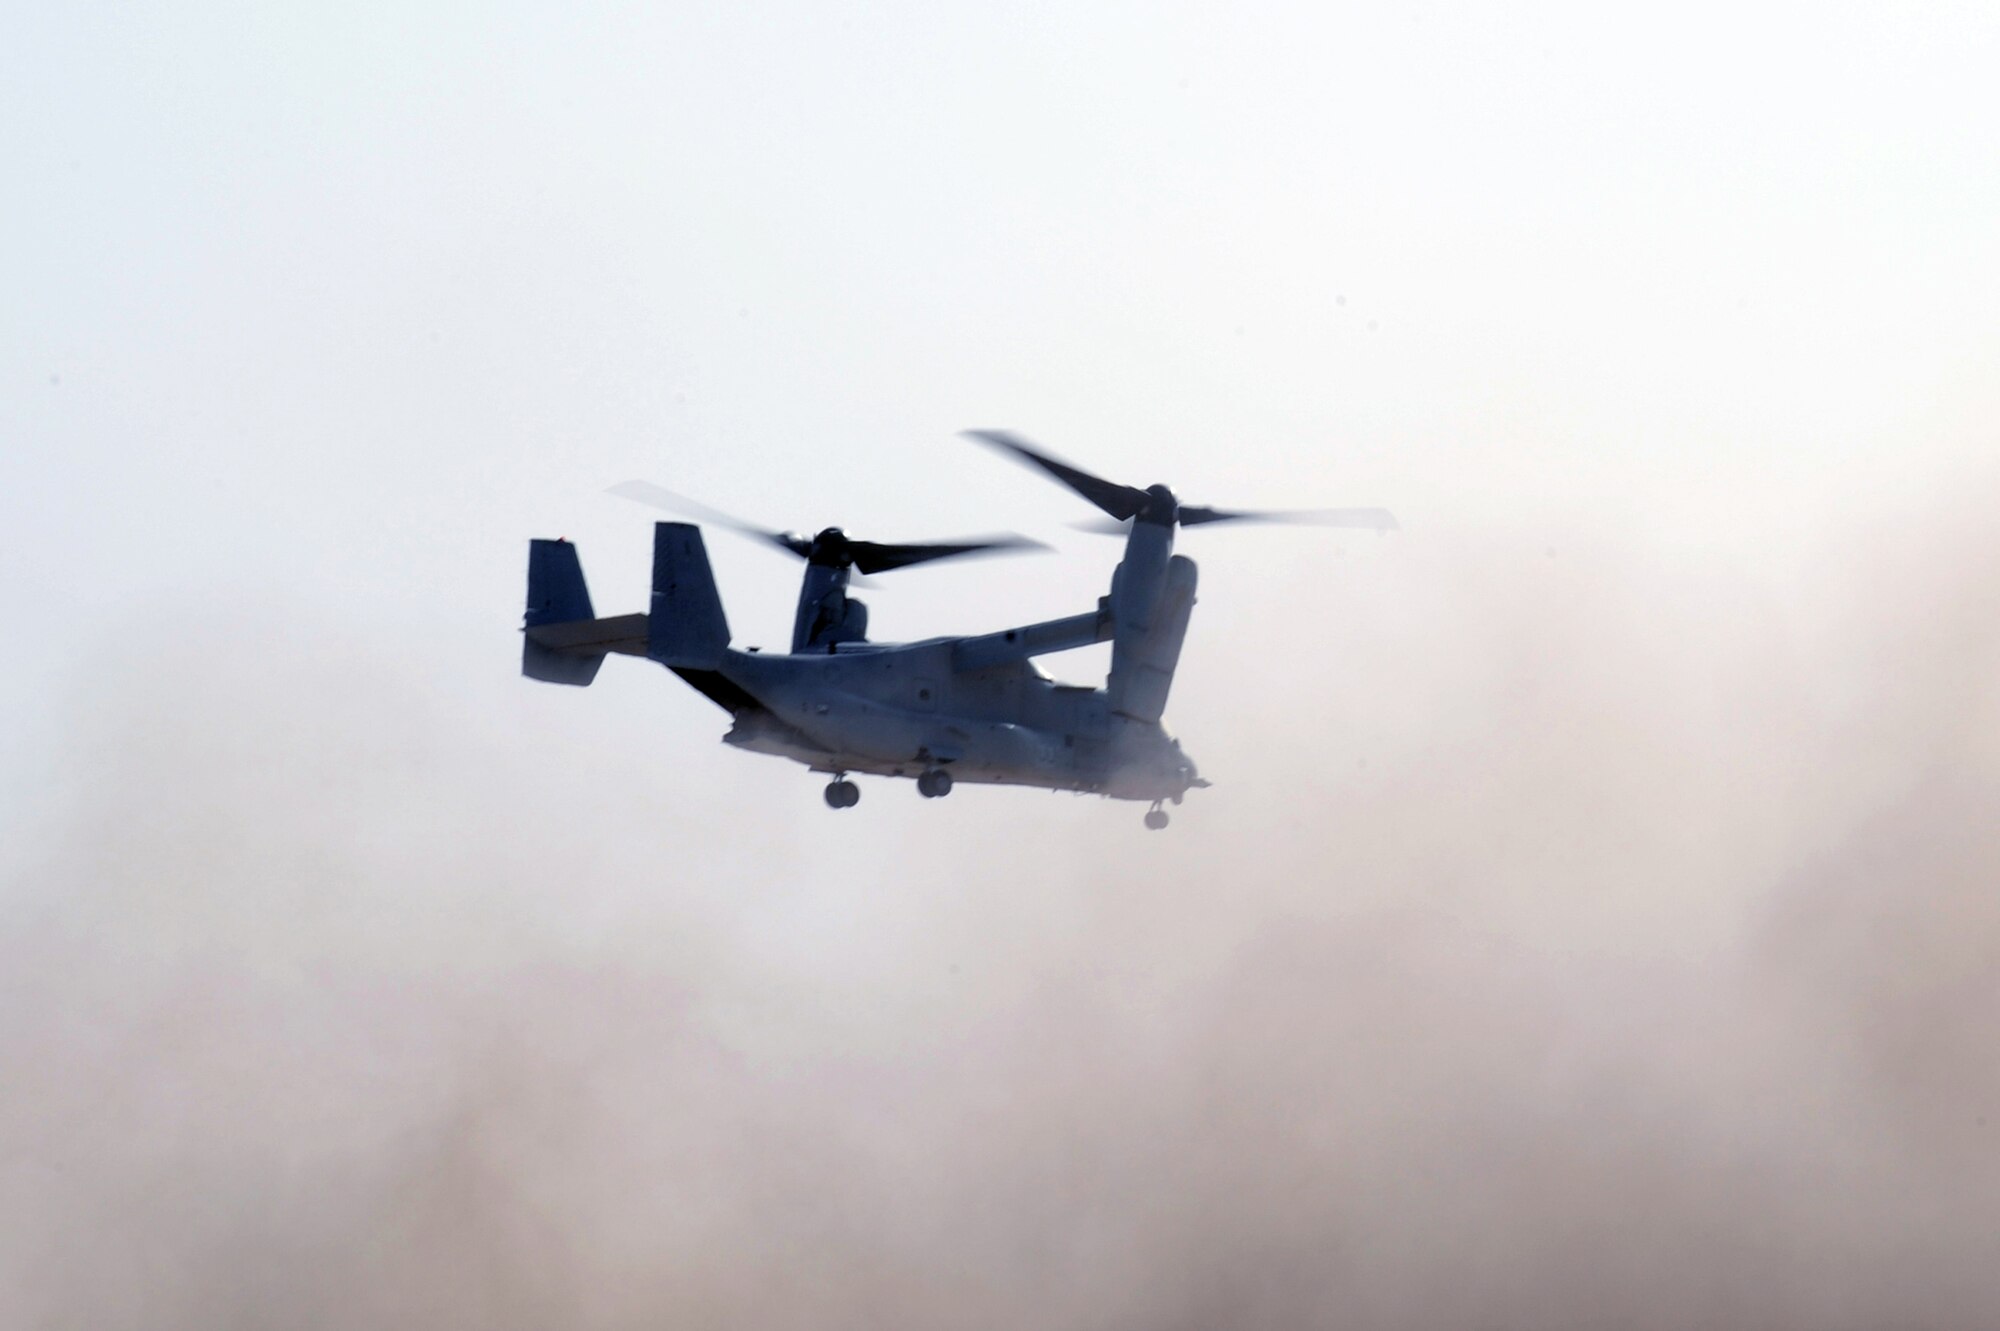 ALI BASE, Iraq -- V-22 Osprey takes off with Soldiers and Airmen of the Contingency Operating Base Adder and Ali Base here April 24.  The V-22 Osprey is an aircraft used to transport Airmen, Troops, and cargo.  (U. S. Air Force photo / Tech. Sgt. Sabrina Johnson)  